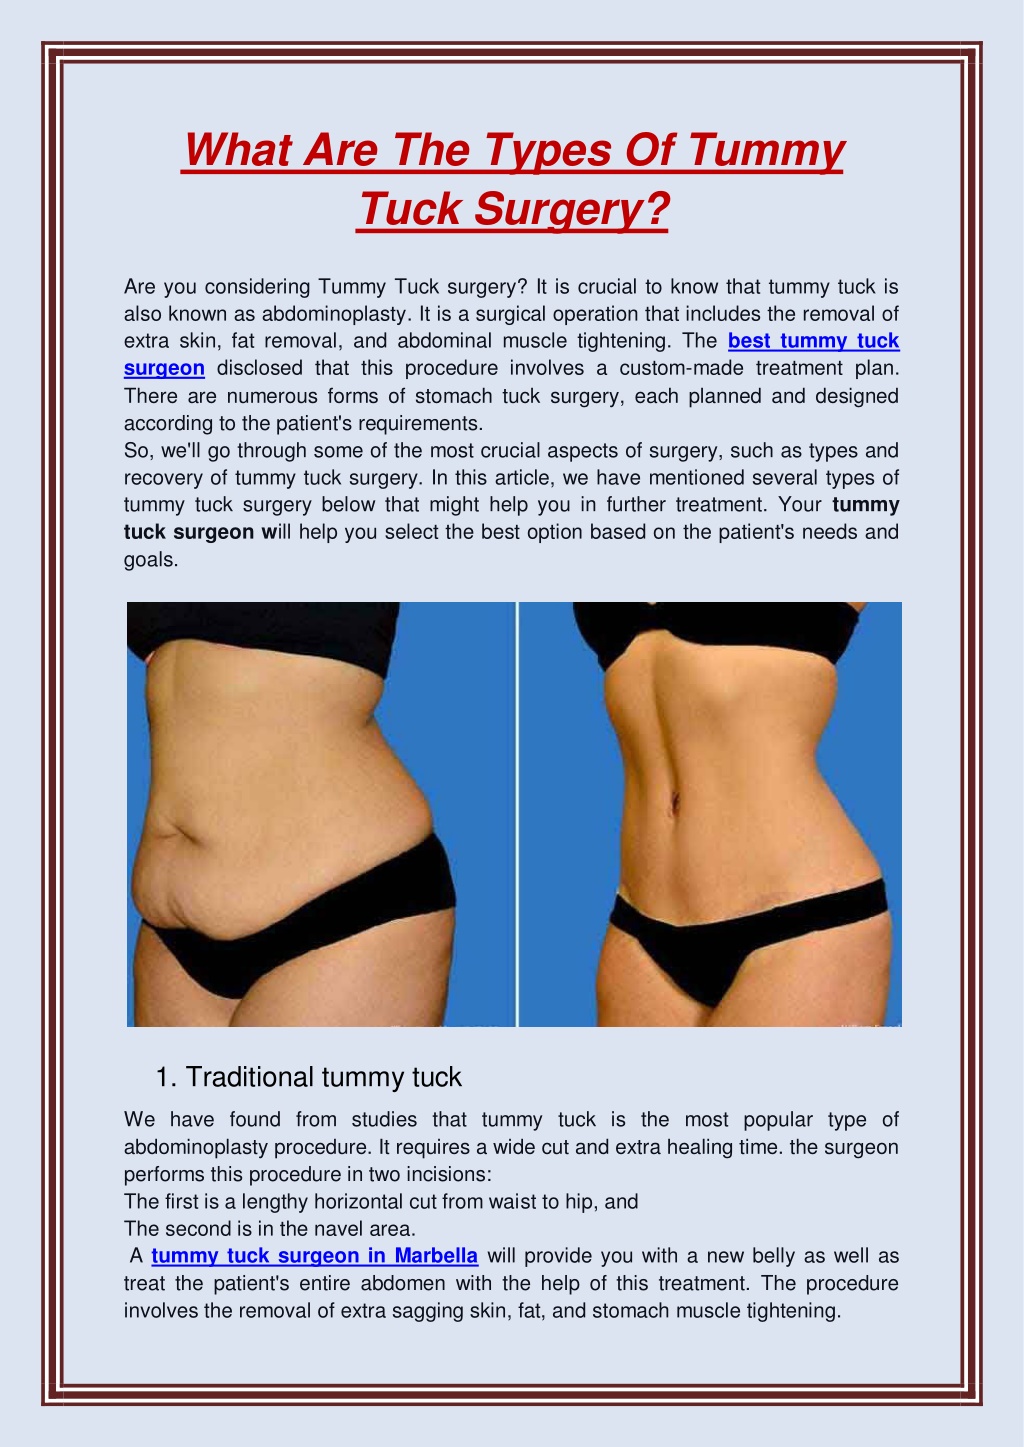 Ppt What Are The Types Of Tummy Tuck Surgery Powerpoint Presentation Id11389018